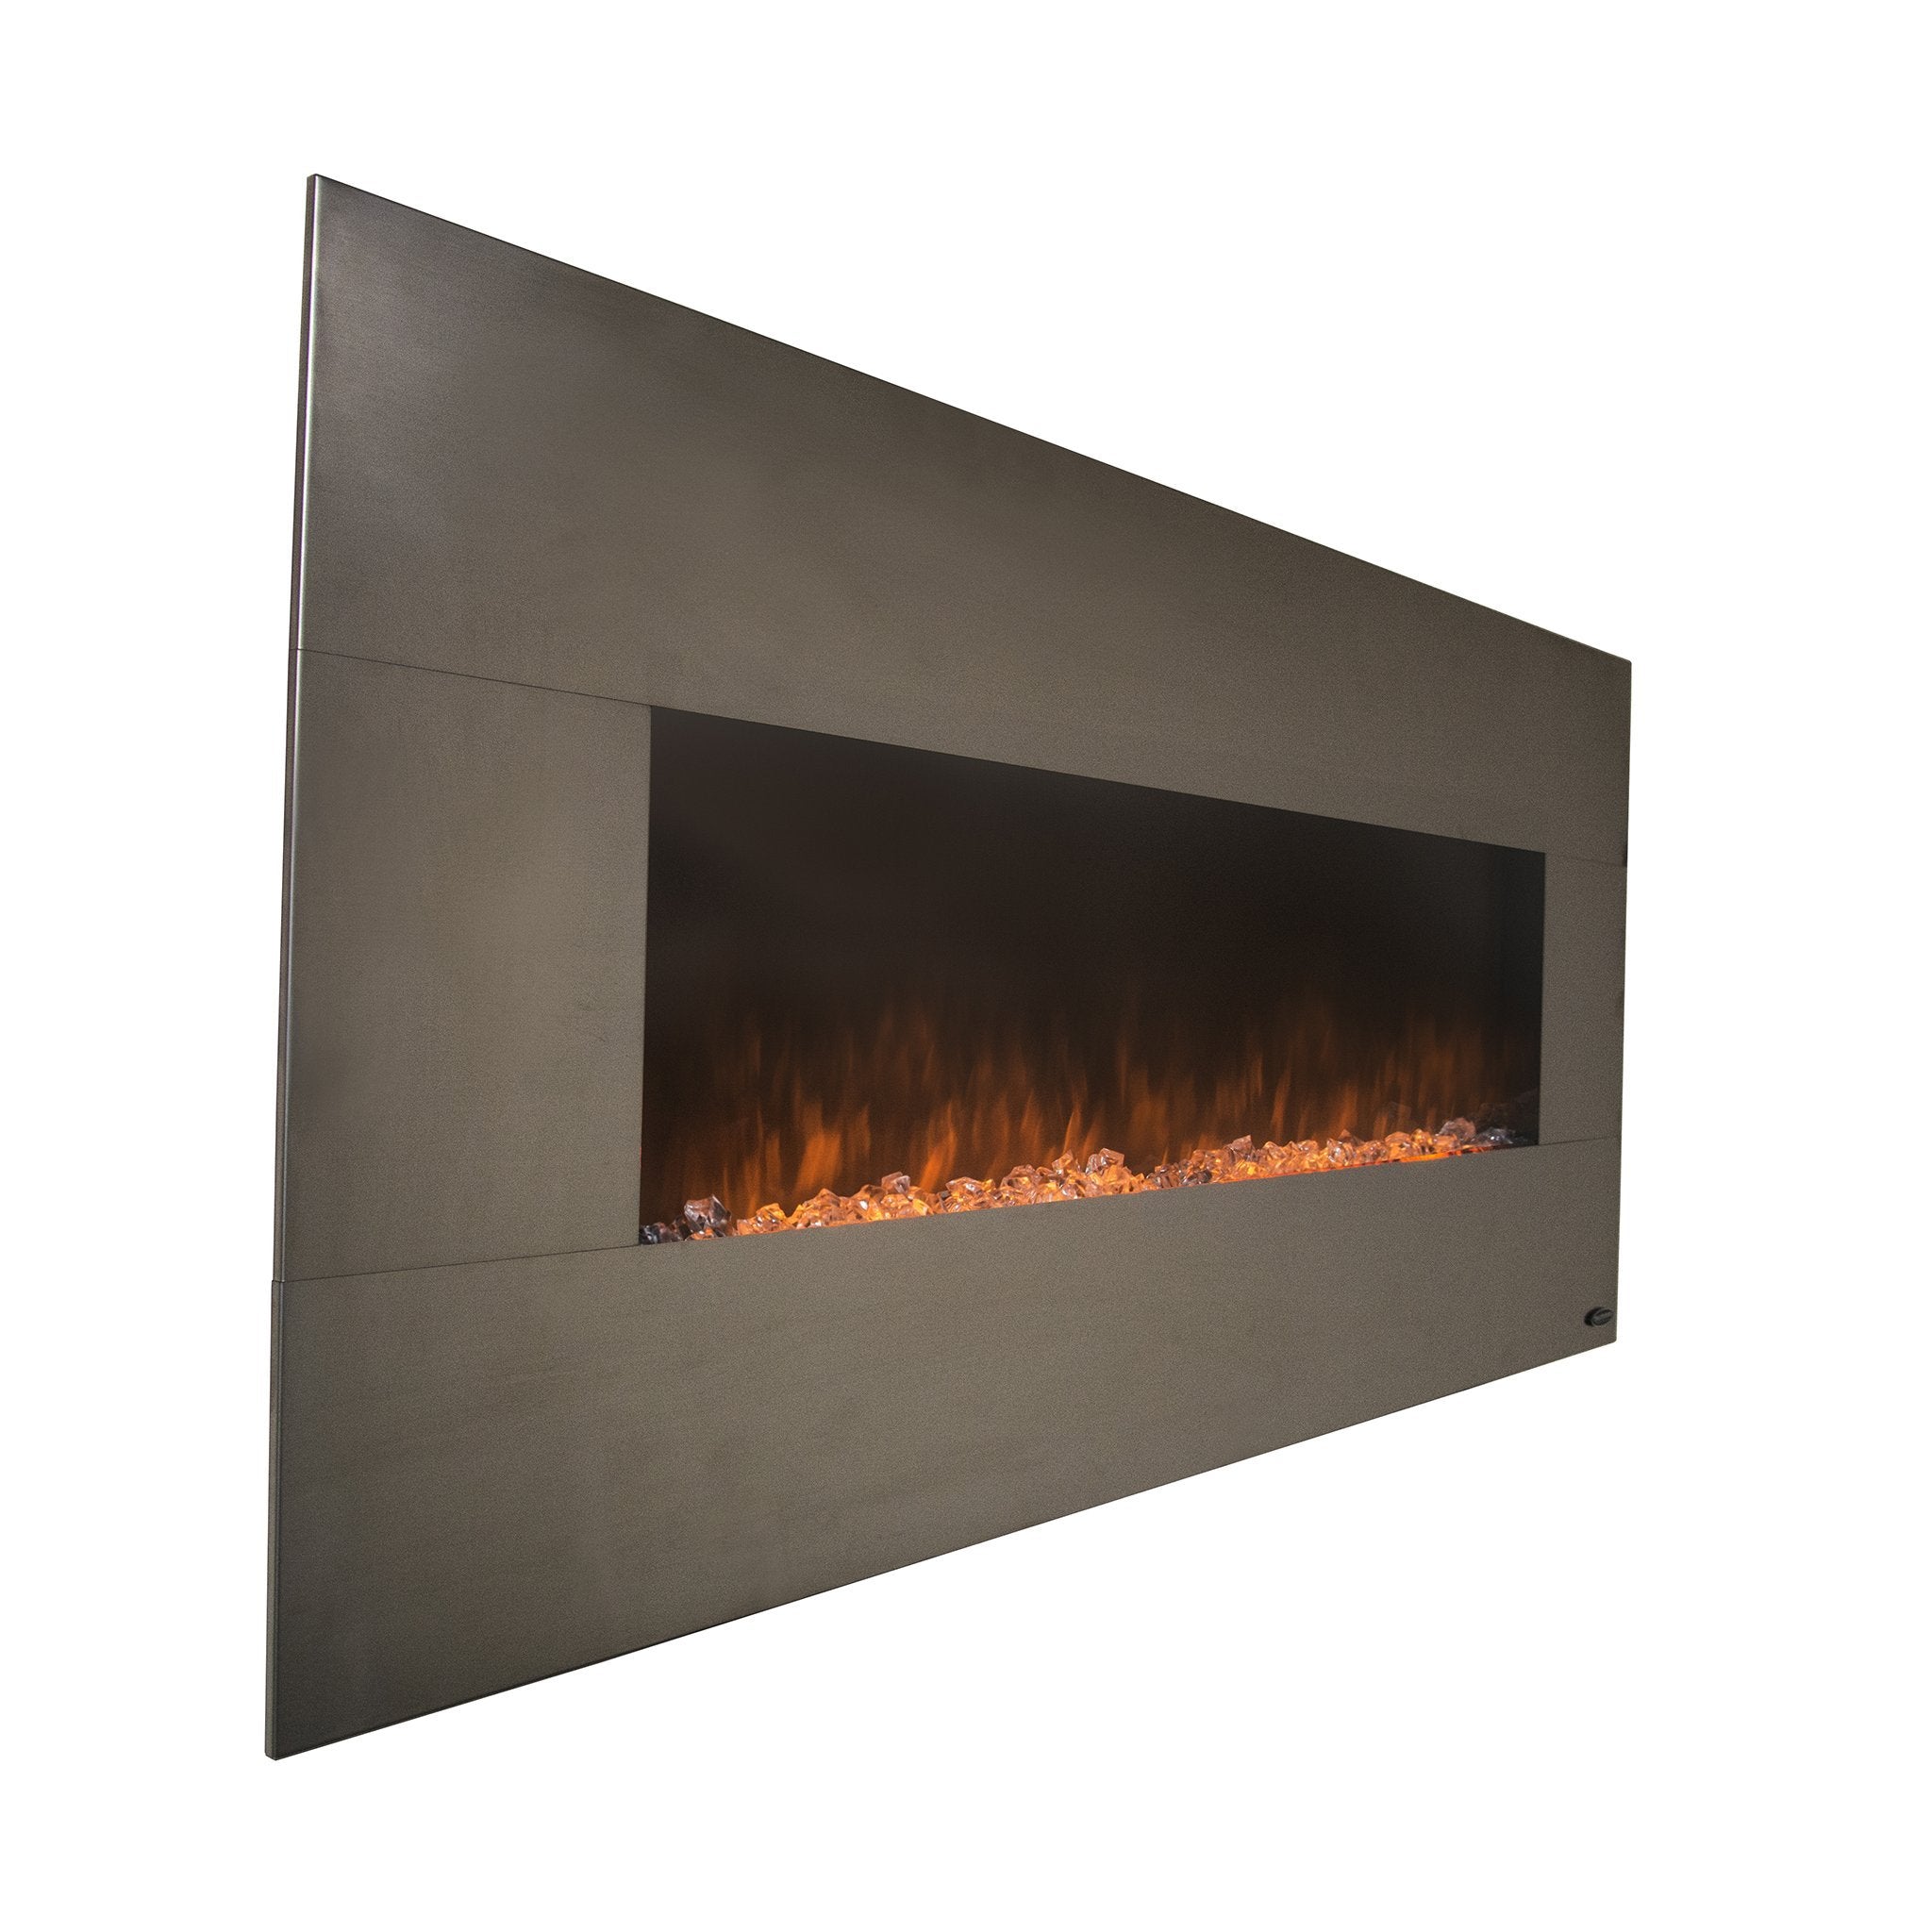 Onyx Stainless 80026  Refurbished Wall Mounted Electric Fireplace - angled.